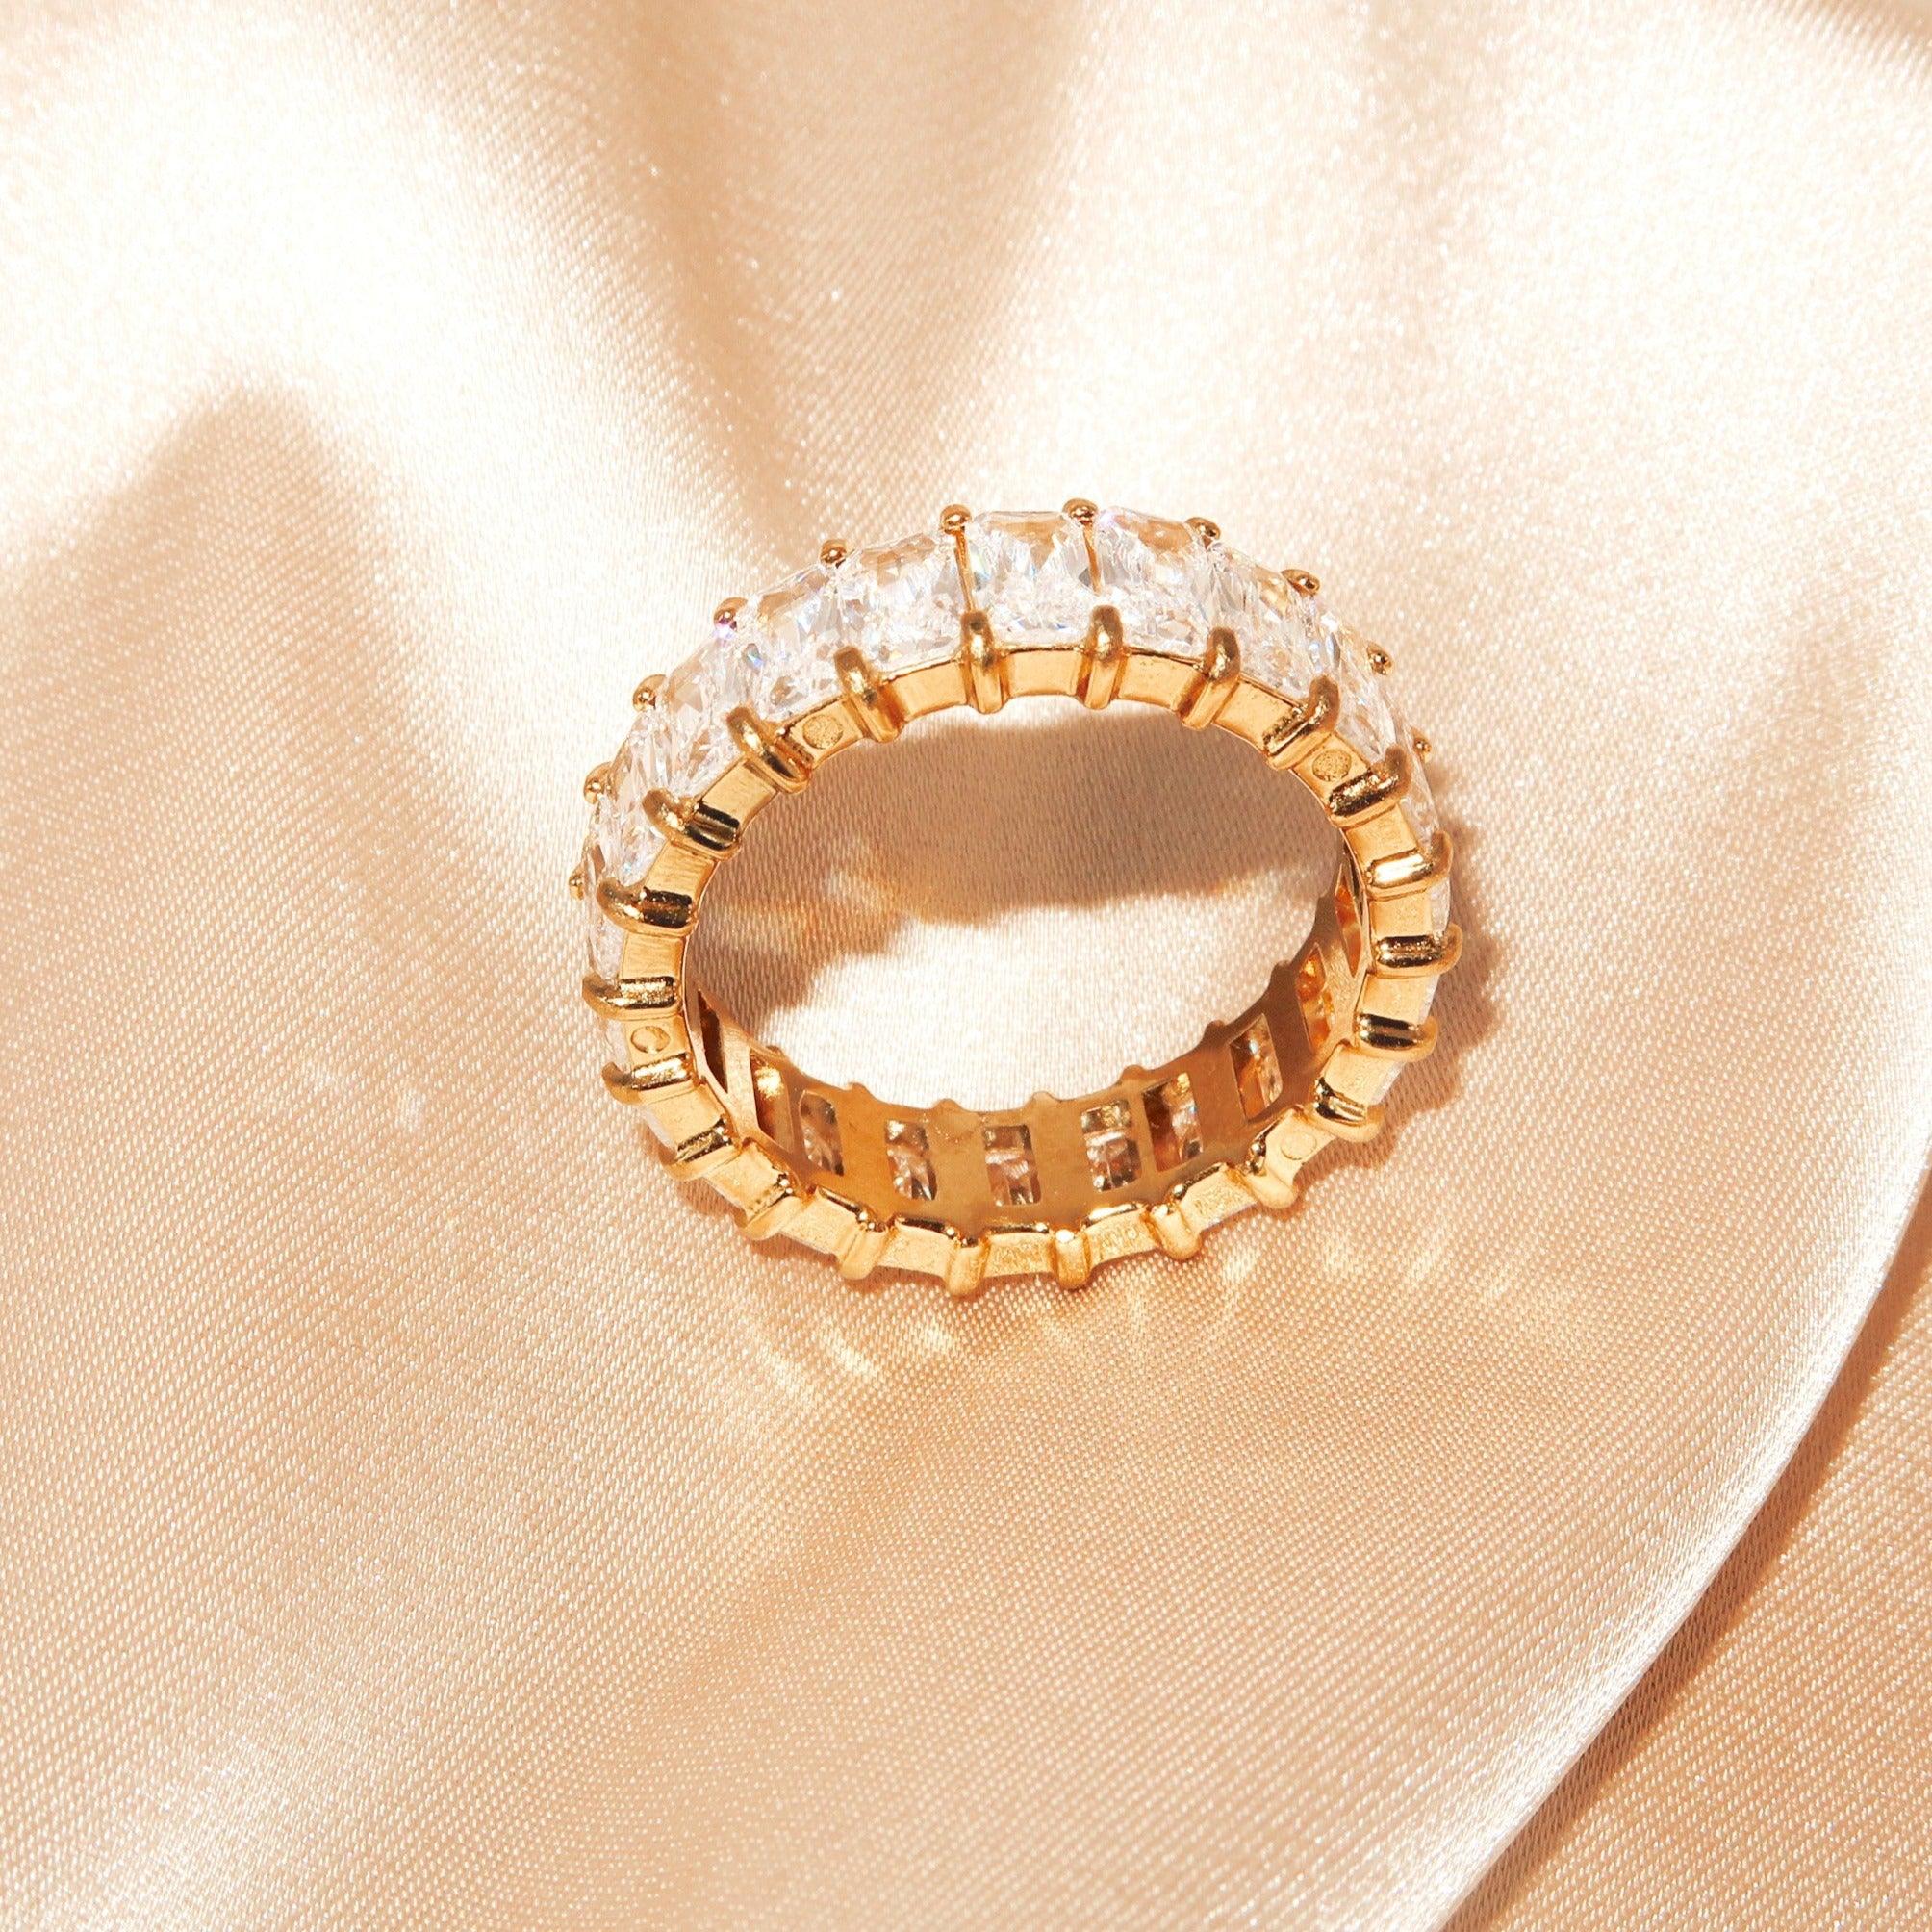 ANN - 18K PVD Gold Plated Ring with Emerald Cut CZ Stones